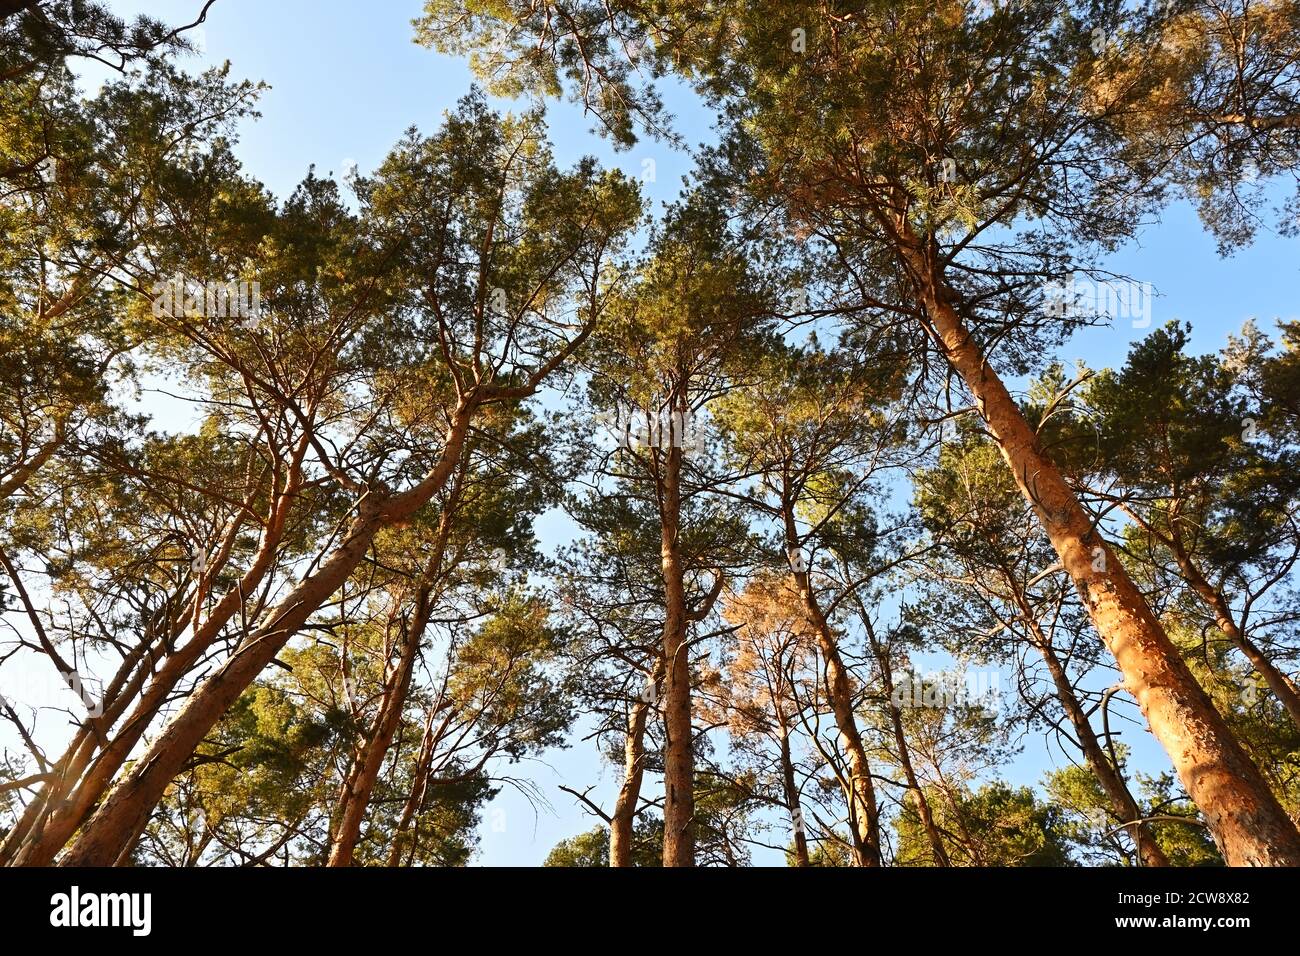 Pine forest, beautifully sunlit by the September sun. Scots pine, Pinus sylvestris is an important tree in forestry. Stock Photo